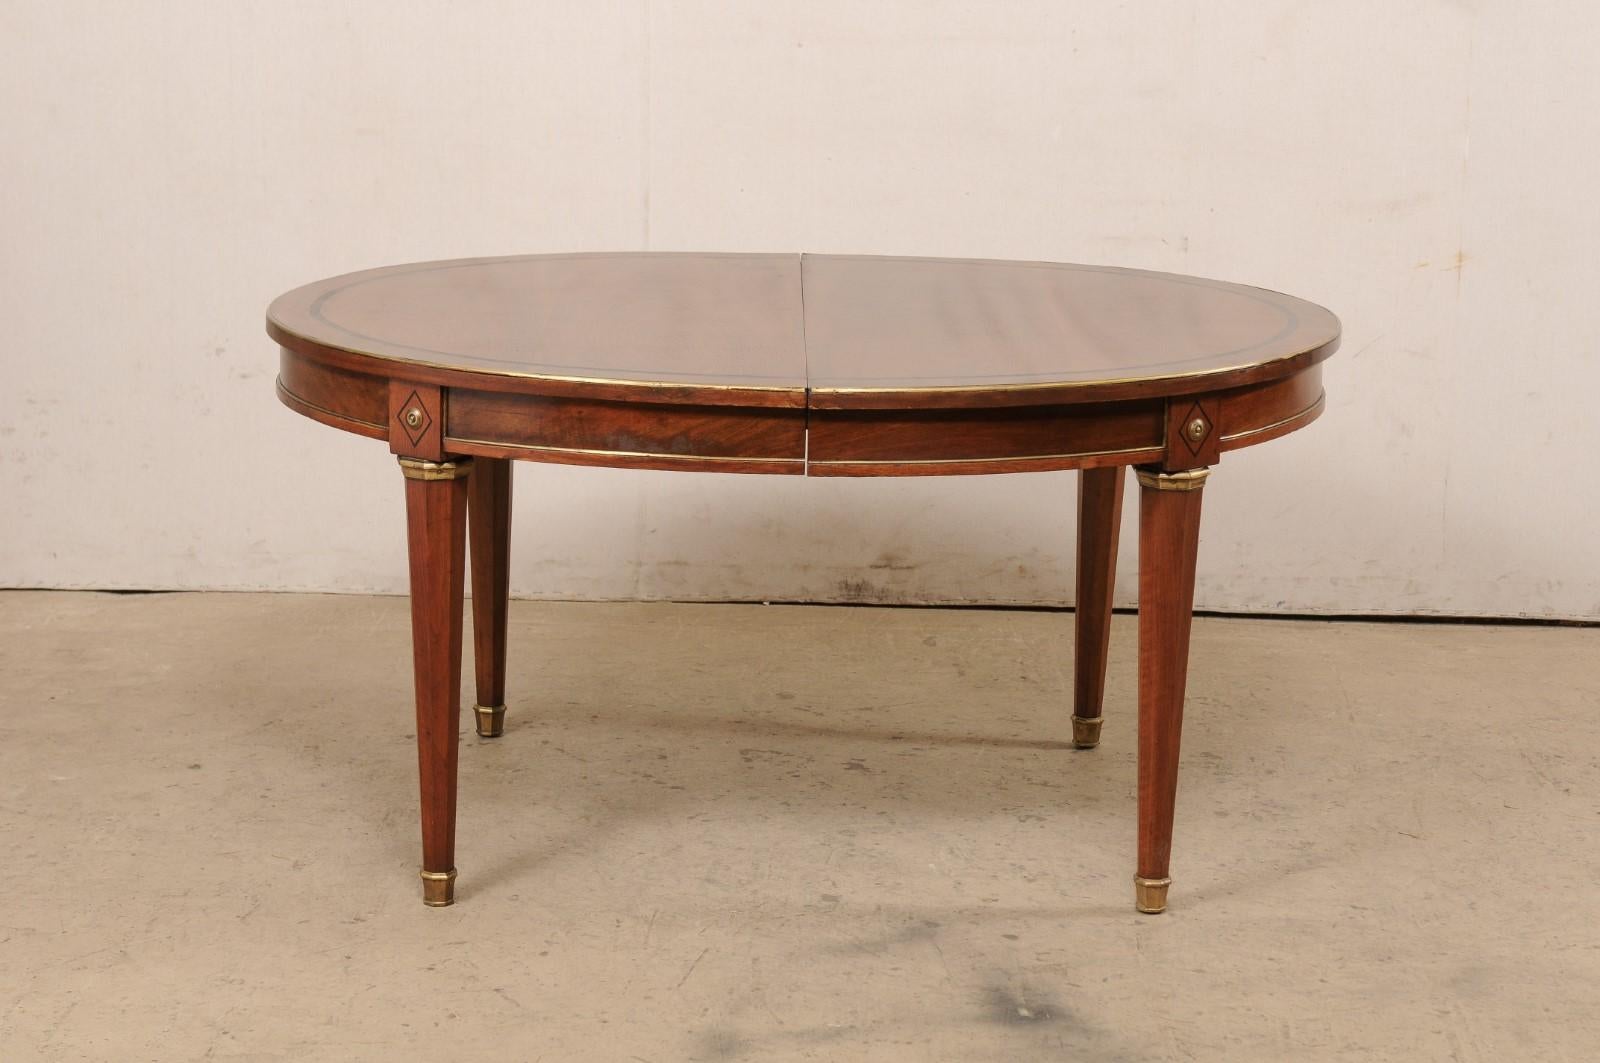 French Neoclassic Style Oval Table with Brass Trim & Accents '1 Leaf Extension' For Sale 1